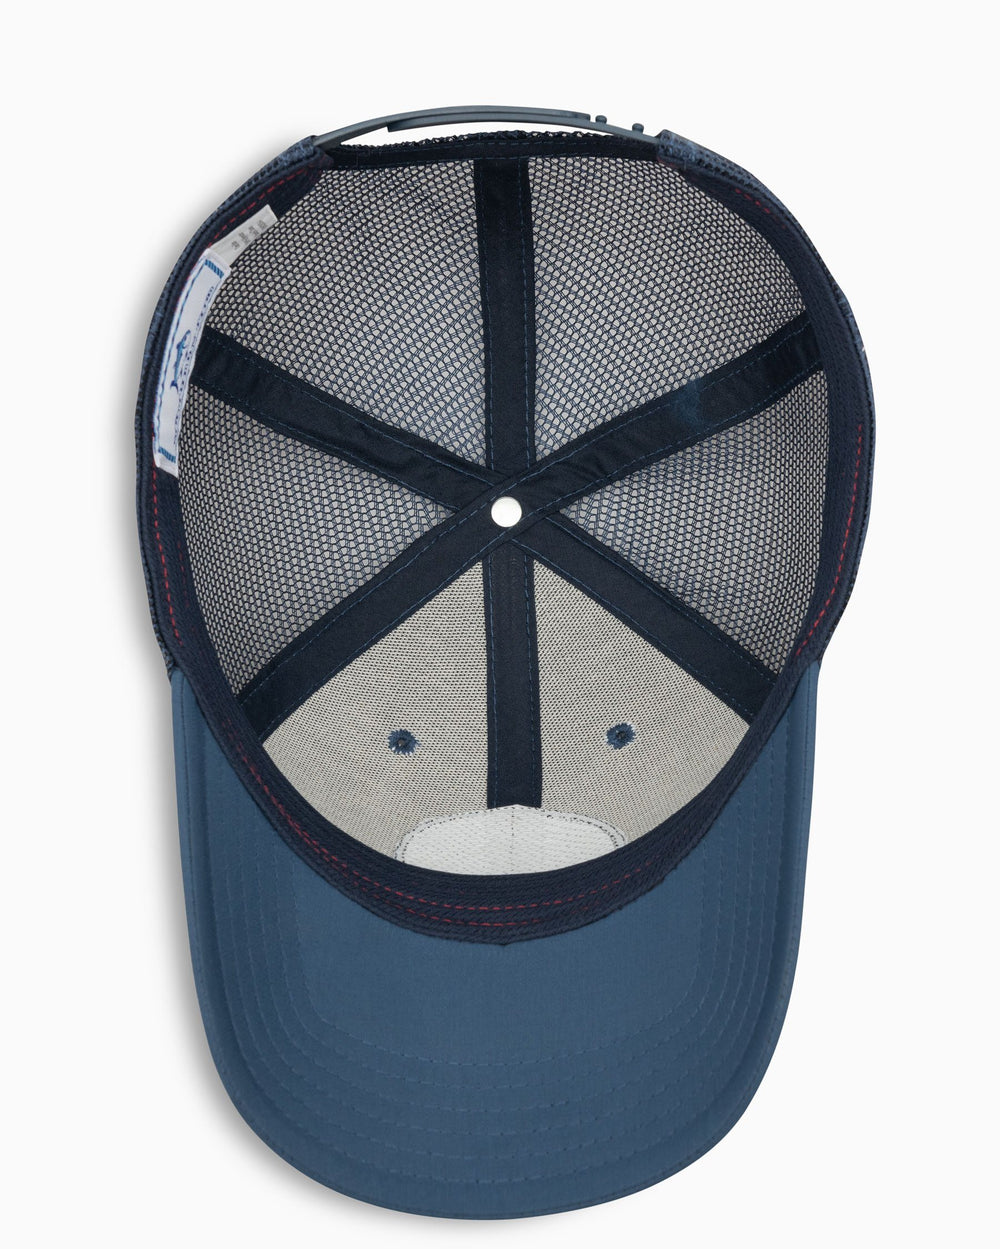 The below view of the Men's South Carolina Patch Performance Trucker Hat by Southern Tide - Seven Seas Blue